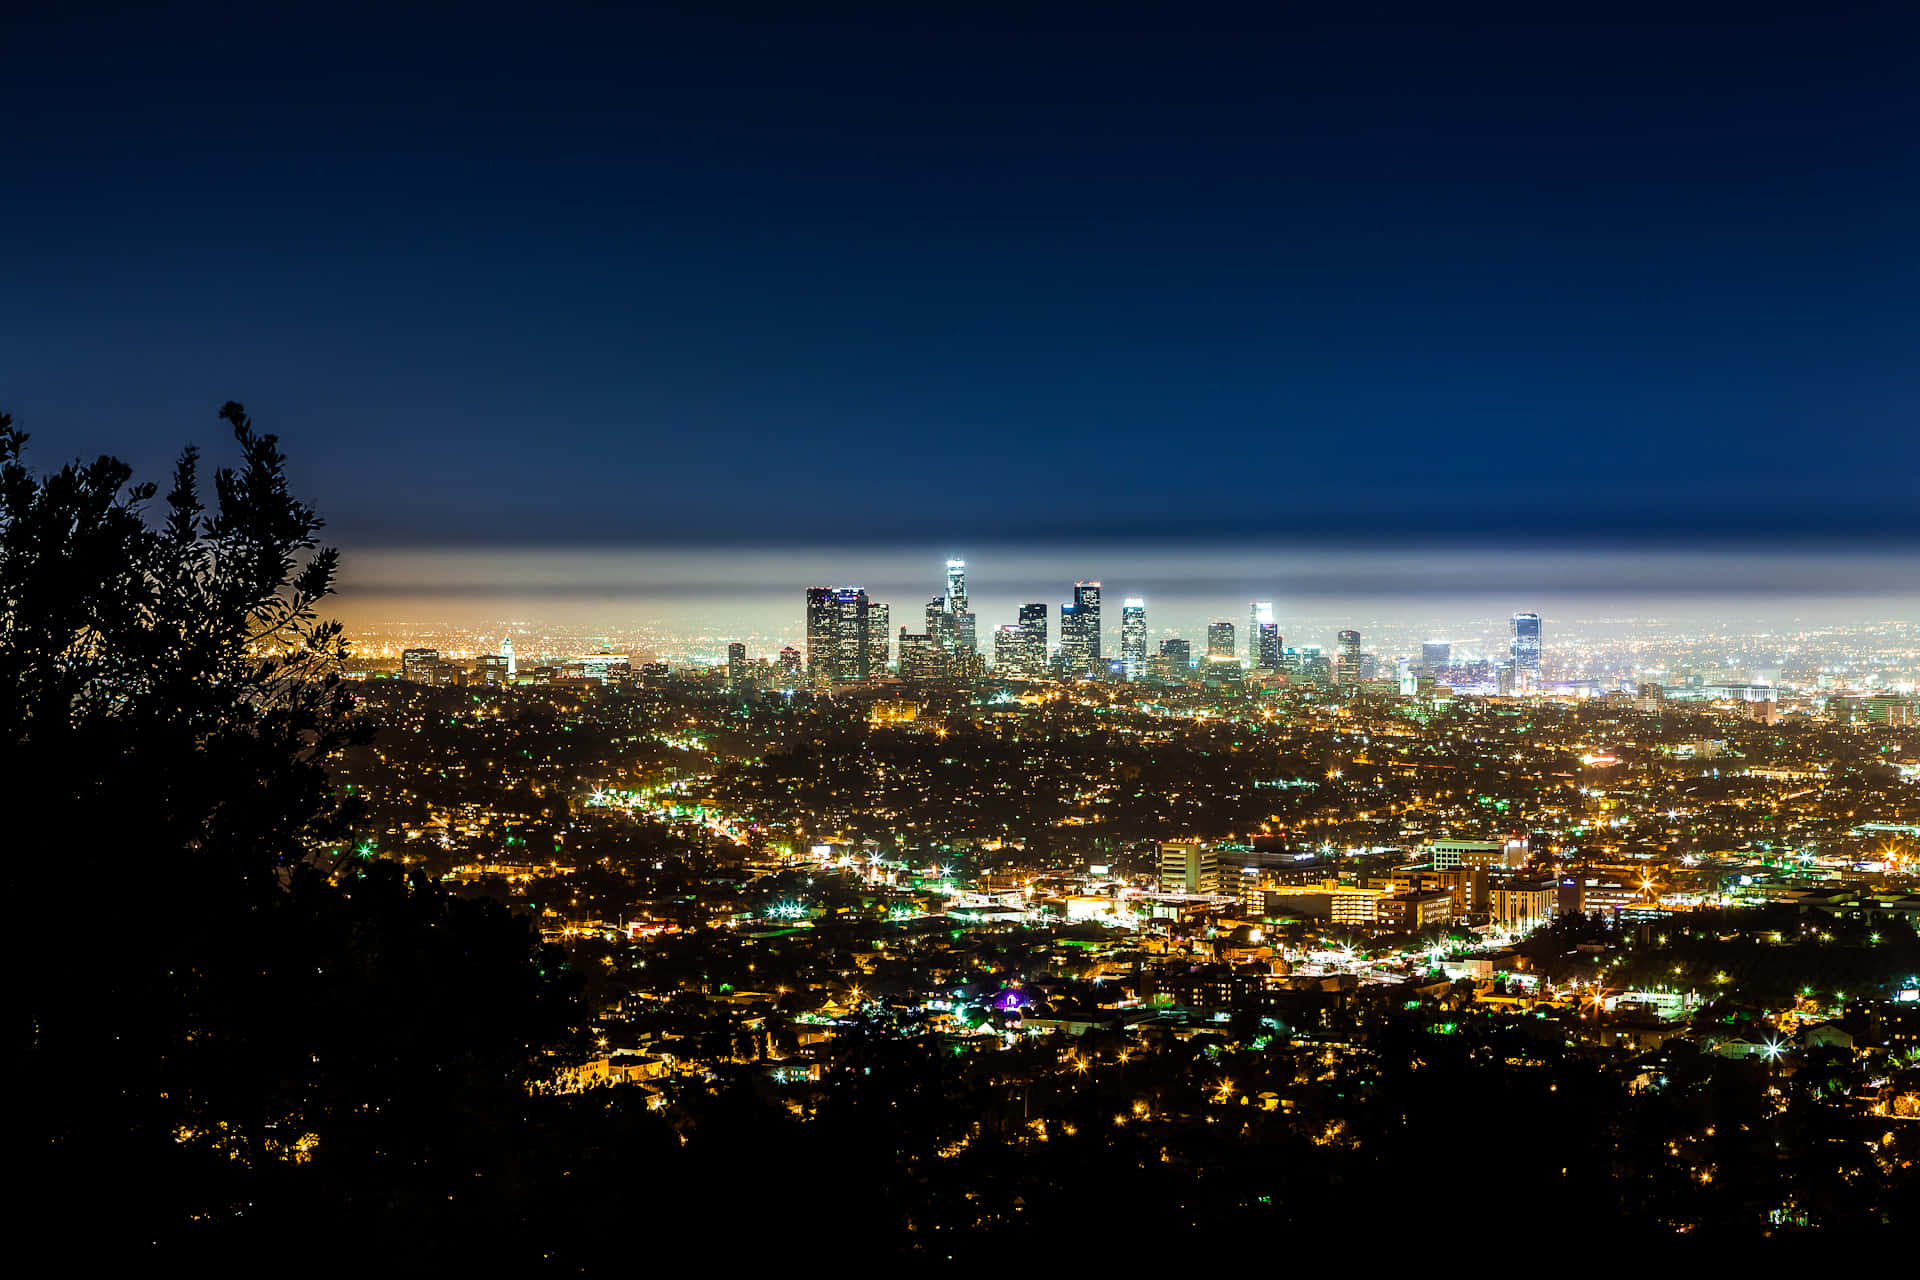 A view of Downtown Los Angeles at night